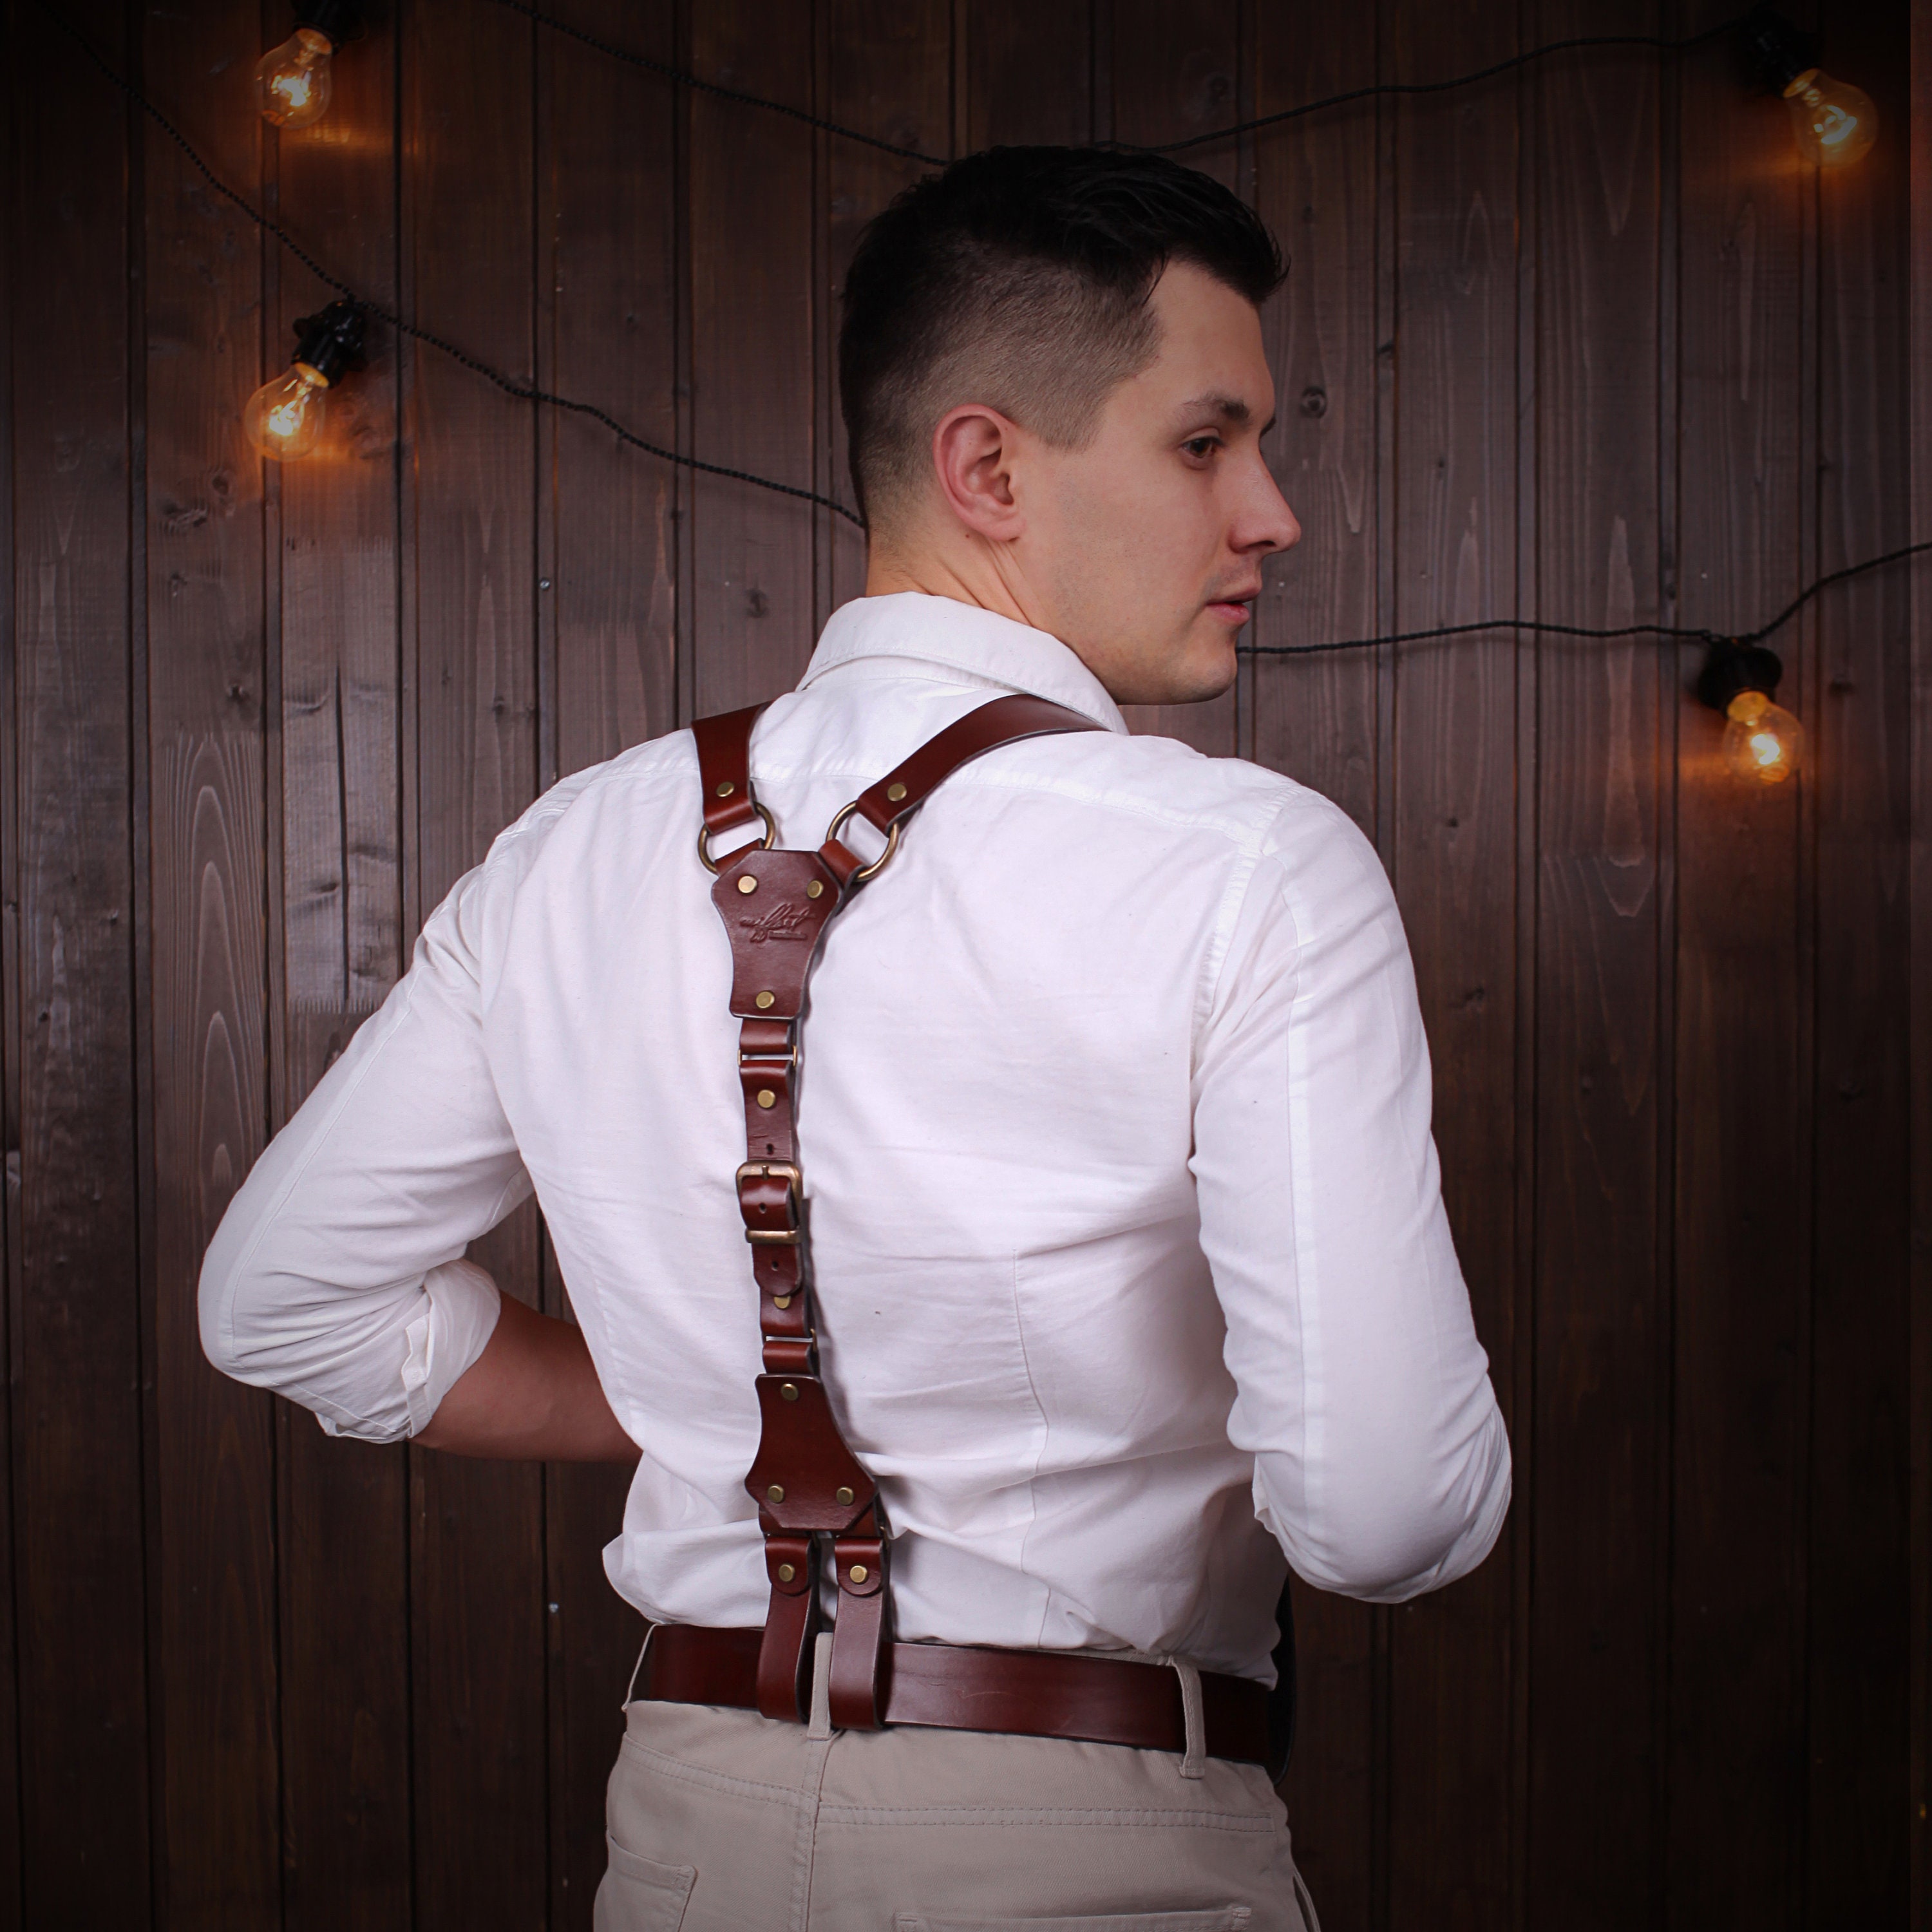 Mens Suspenders, Versatile Leather Harnesses and Accessories for  Alternative Fashion, Cosplay, Gothic, Steampunk and More Perfect for Body -   Canada